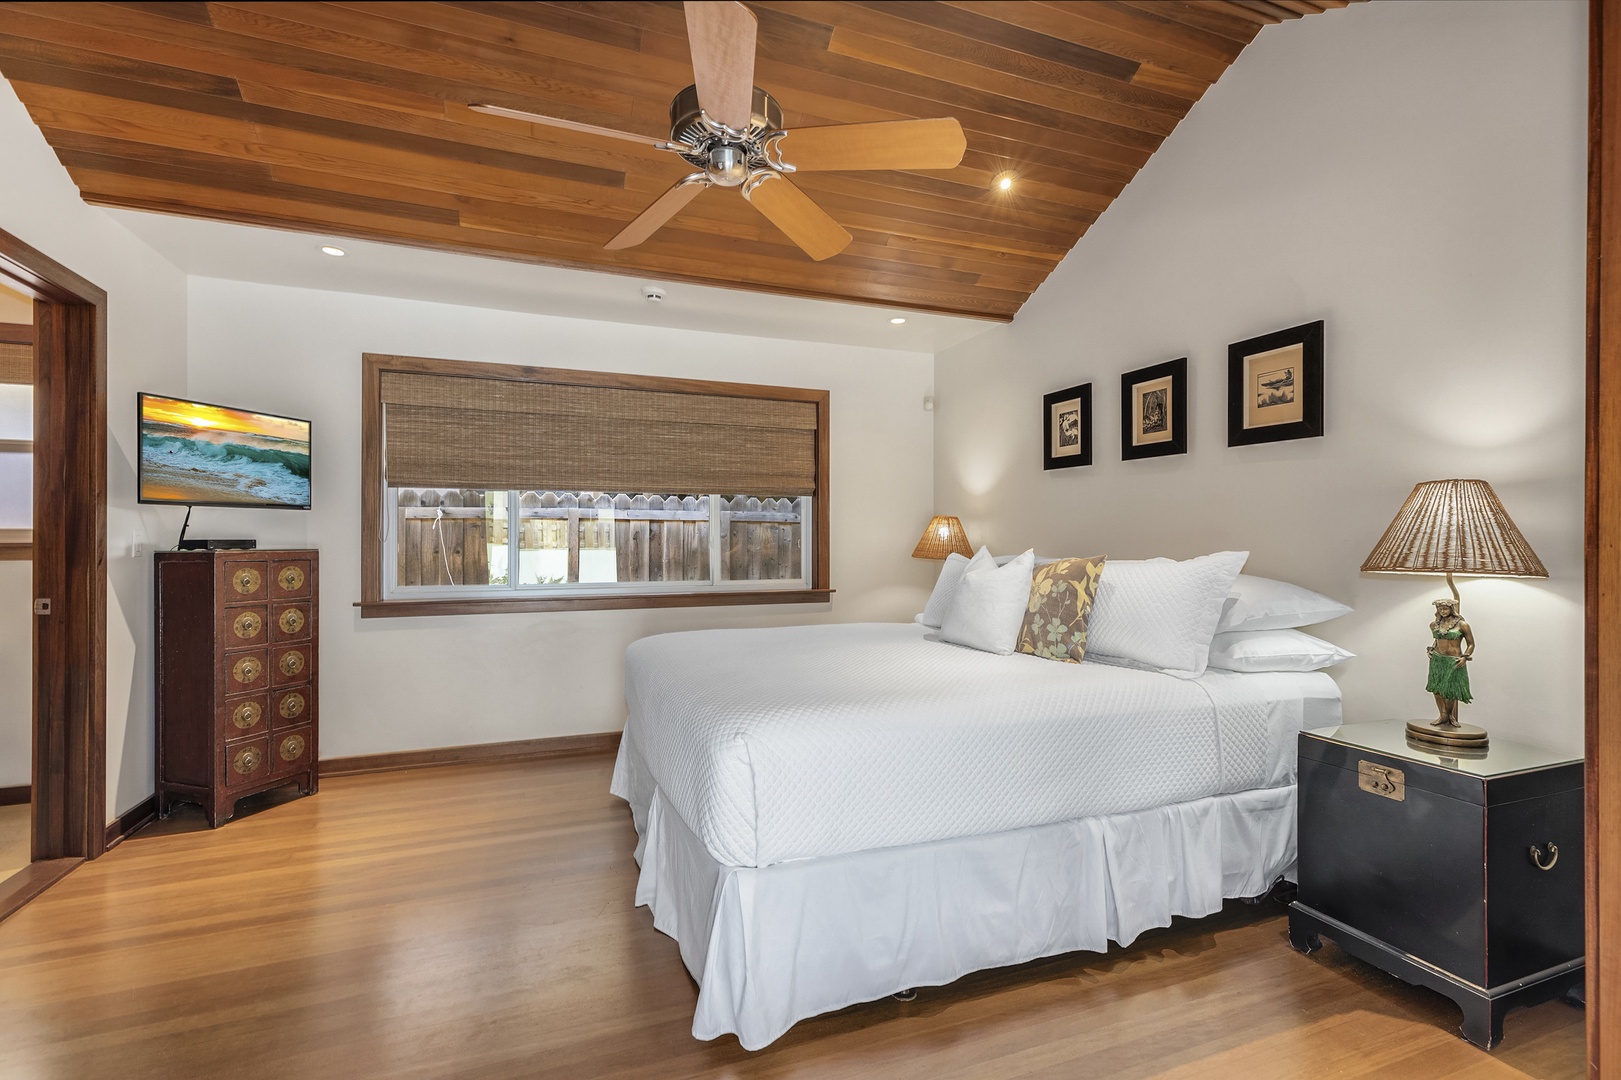 Honolulu Vacation Rentals, Hale Makai at Diamond Head - 2nd Bedroom furnished with King Bed